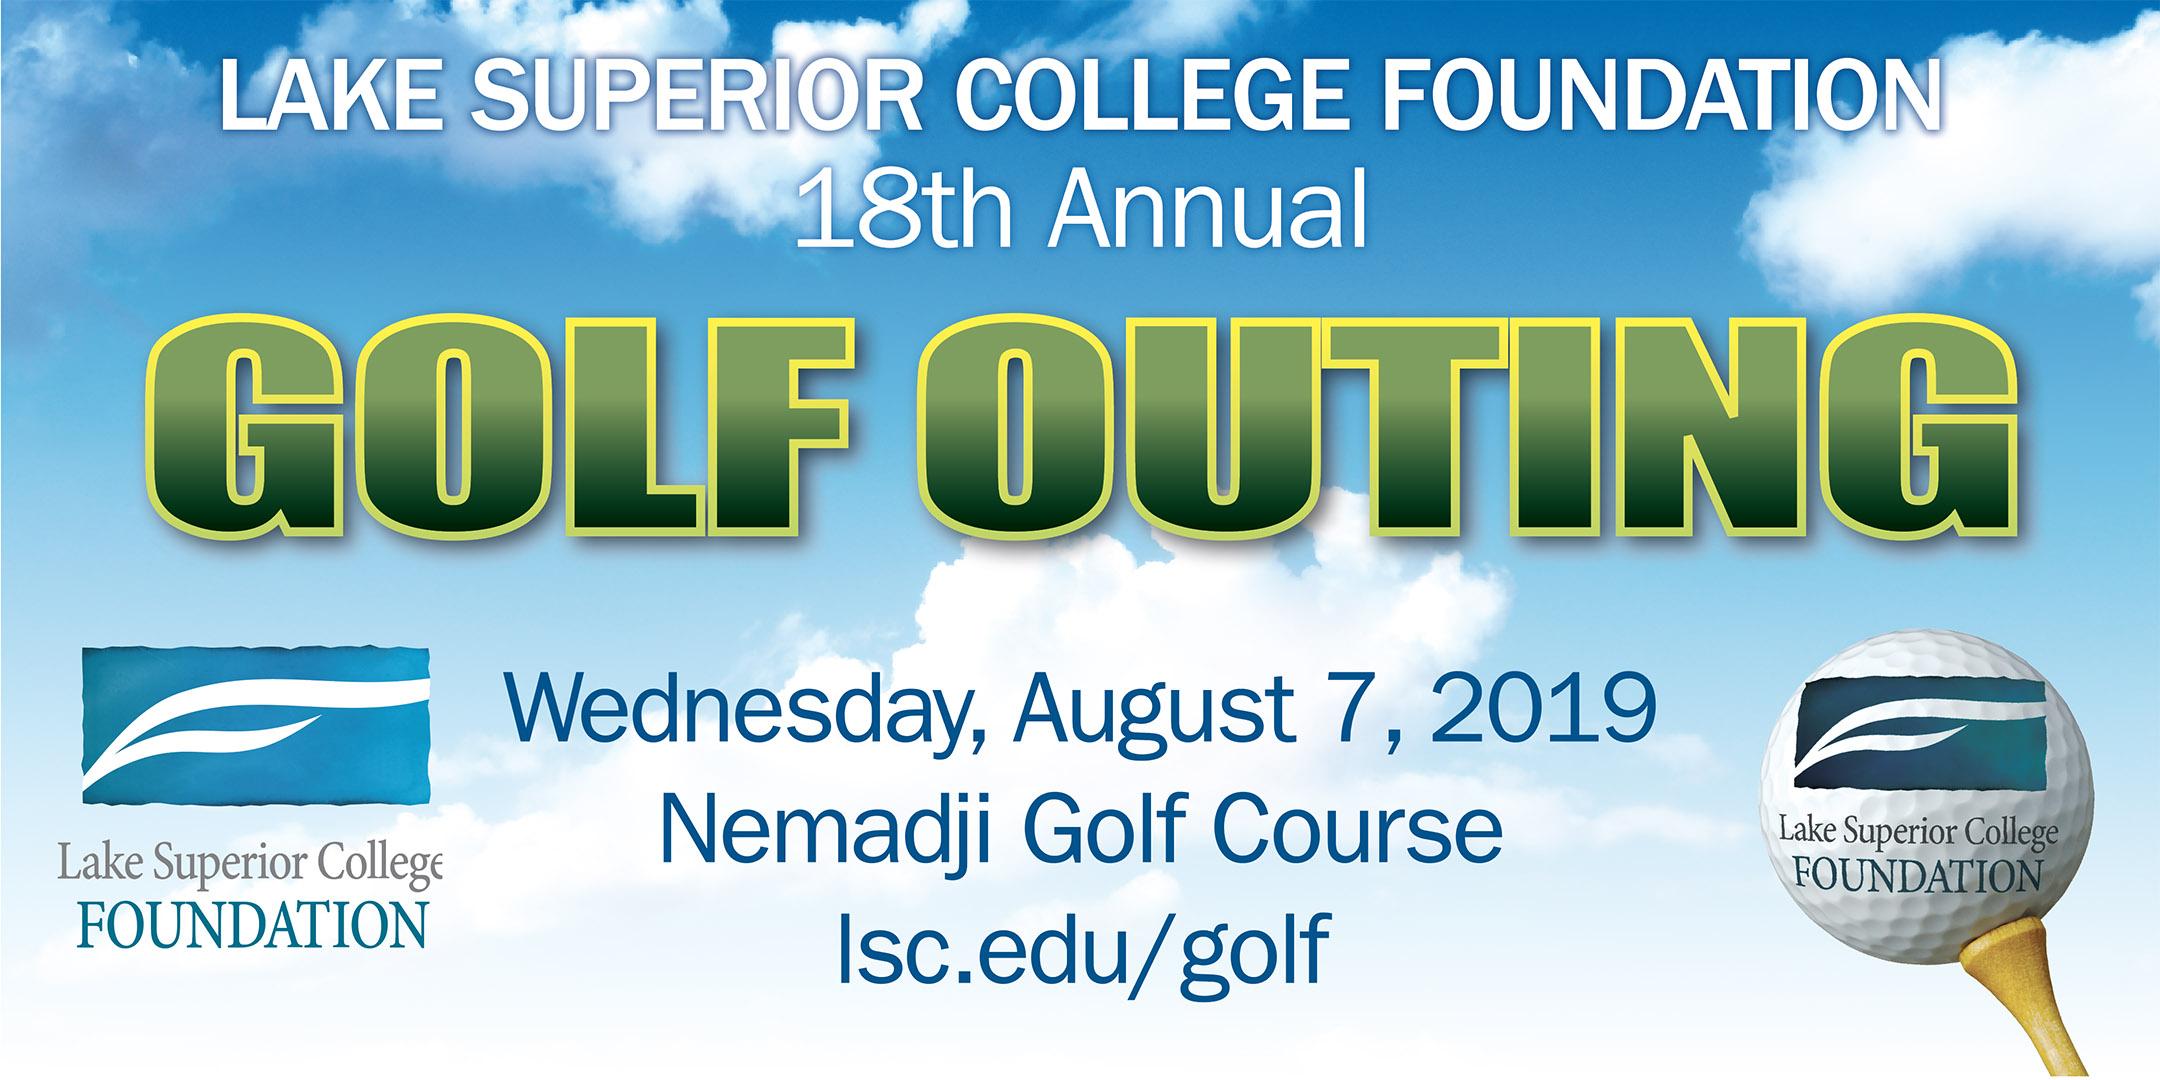 LSC Foundation 18th Annual Golf Outing